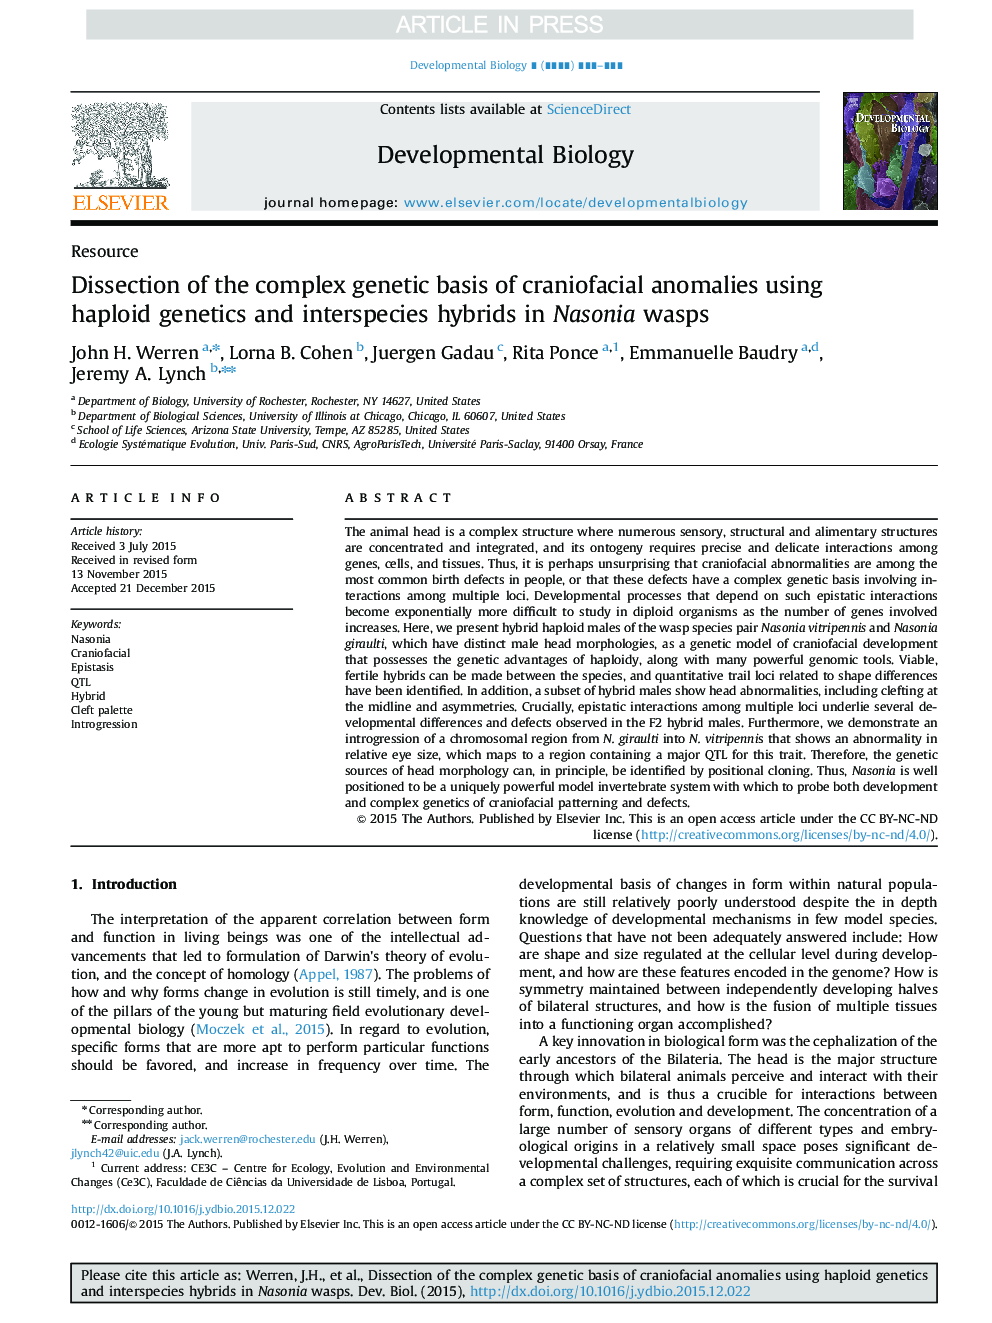 Dissection of the complex genetic basis of craniofacial anomalies using haploid genetics and interspecies hybrids in Nasonia wasps